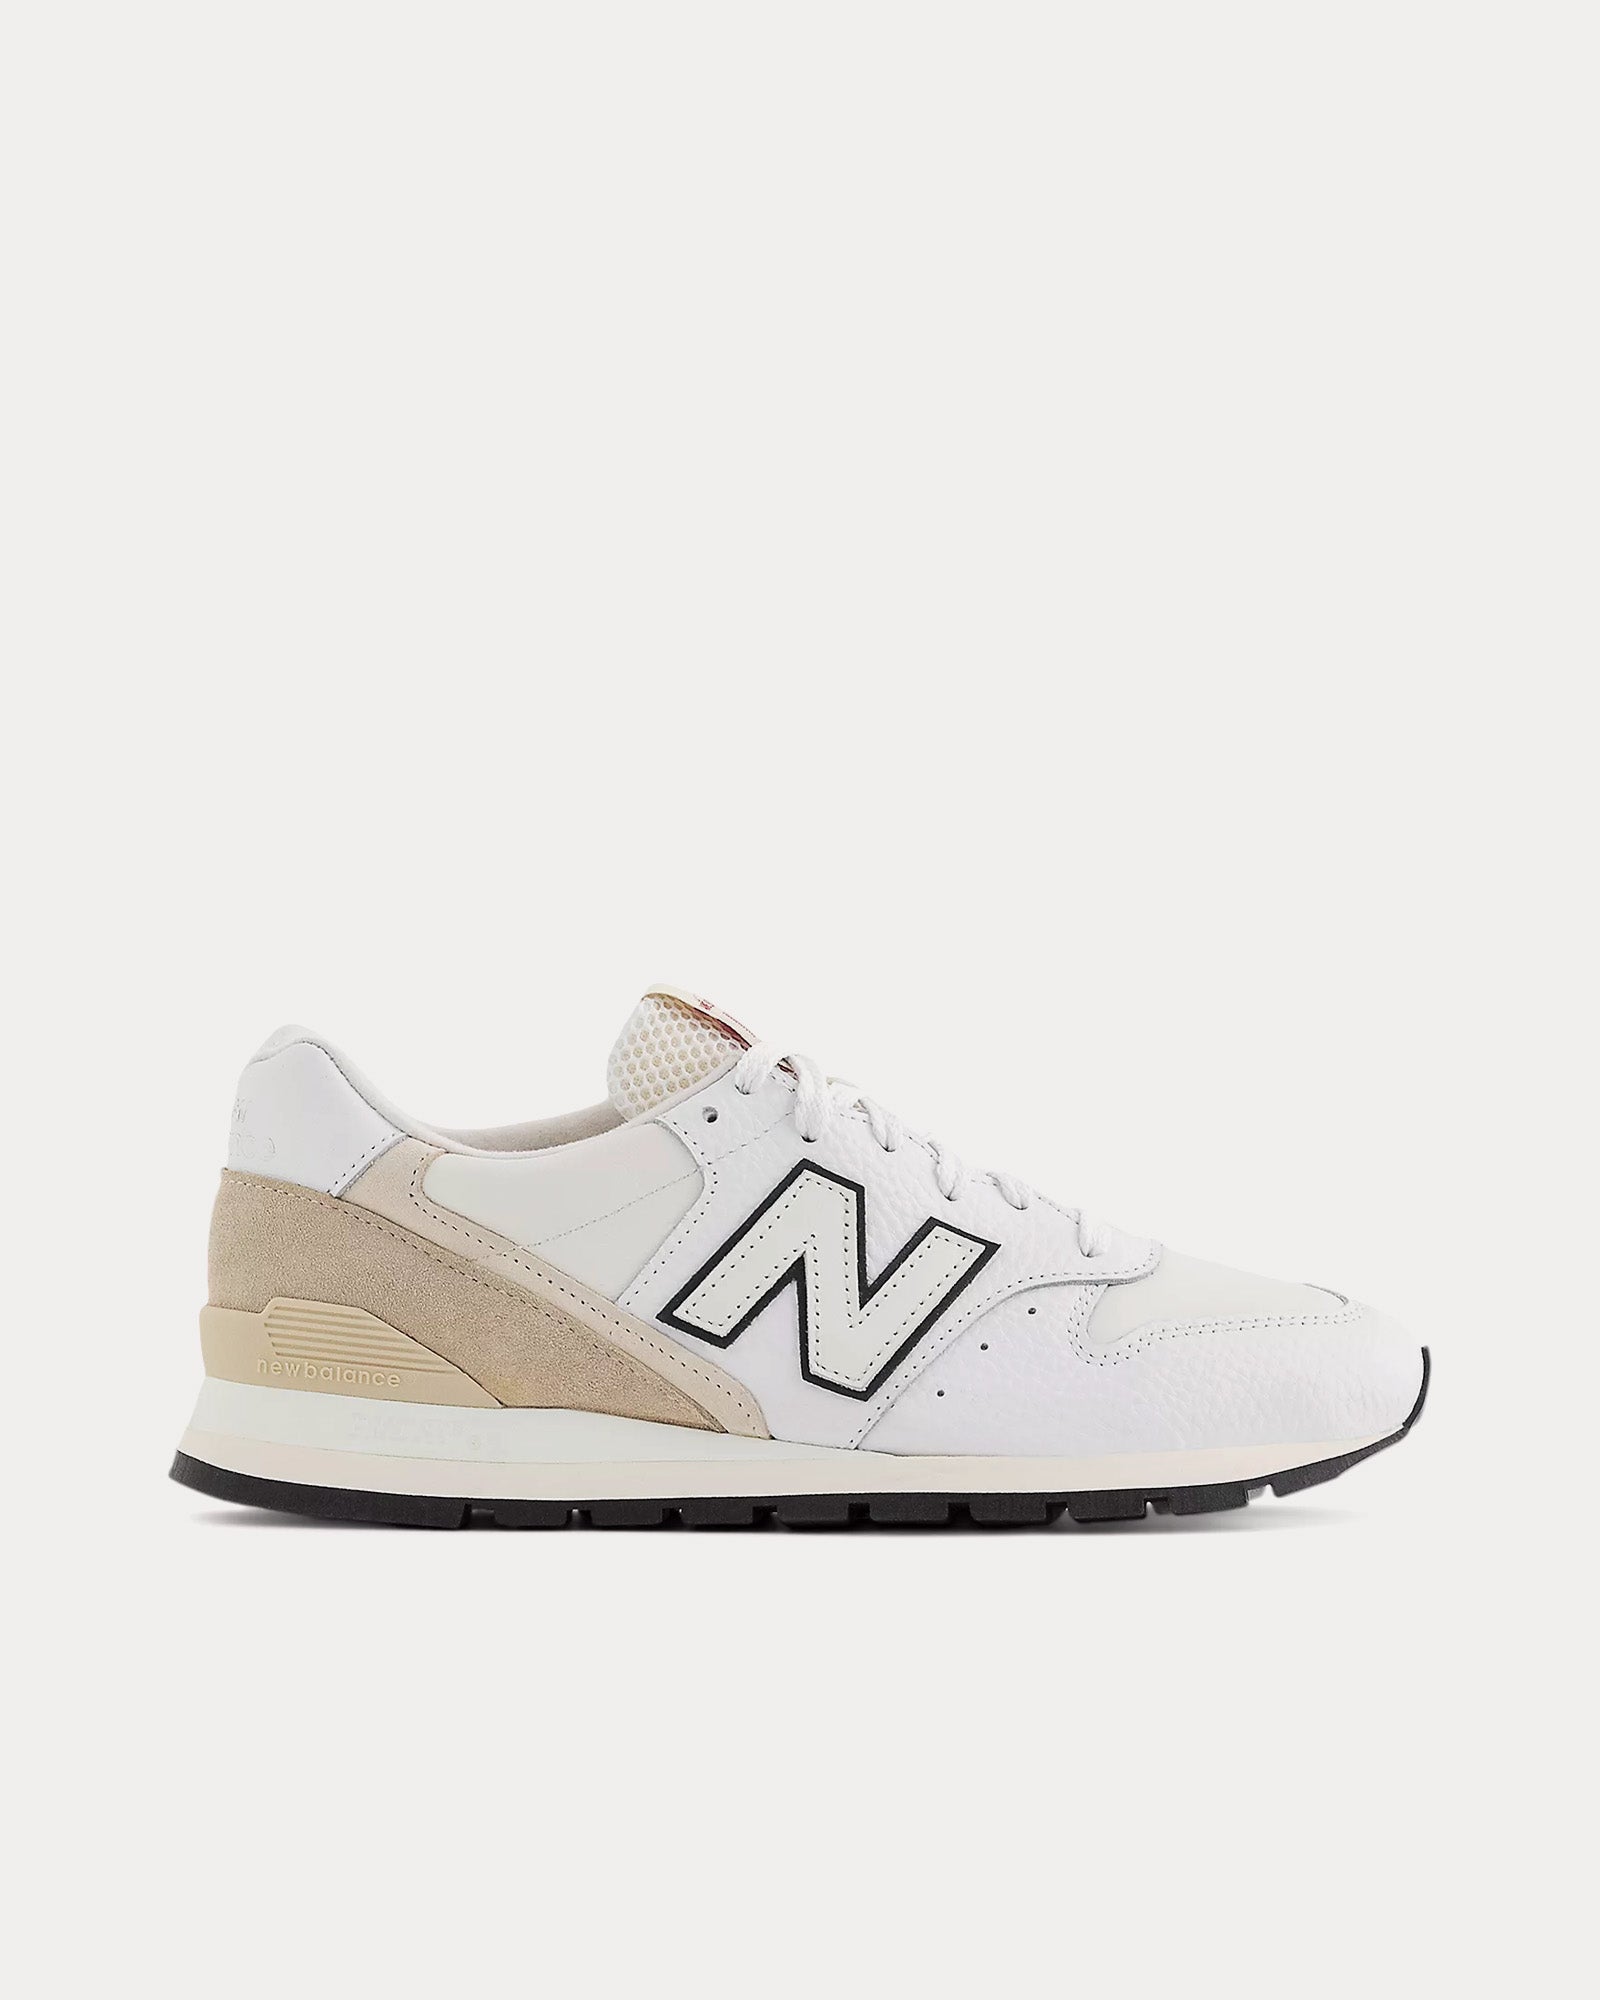 New Balance x Aime Leon Dore - Made in USA 996 White / Sandstone Low Top Sneakers